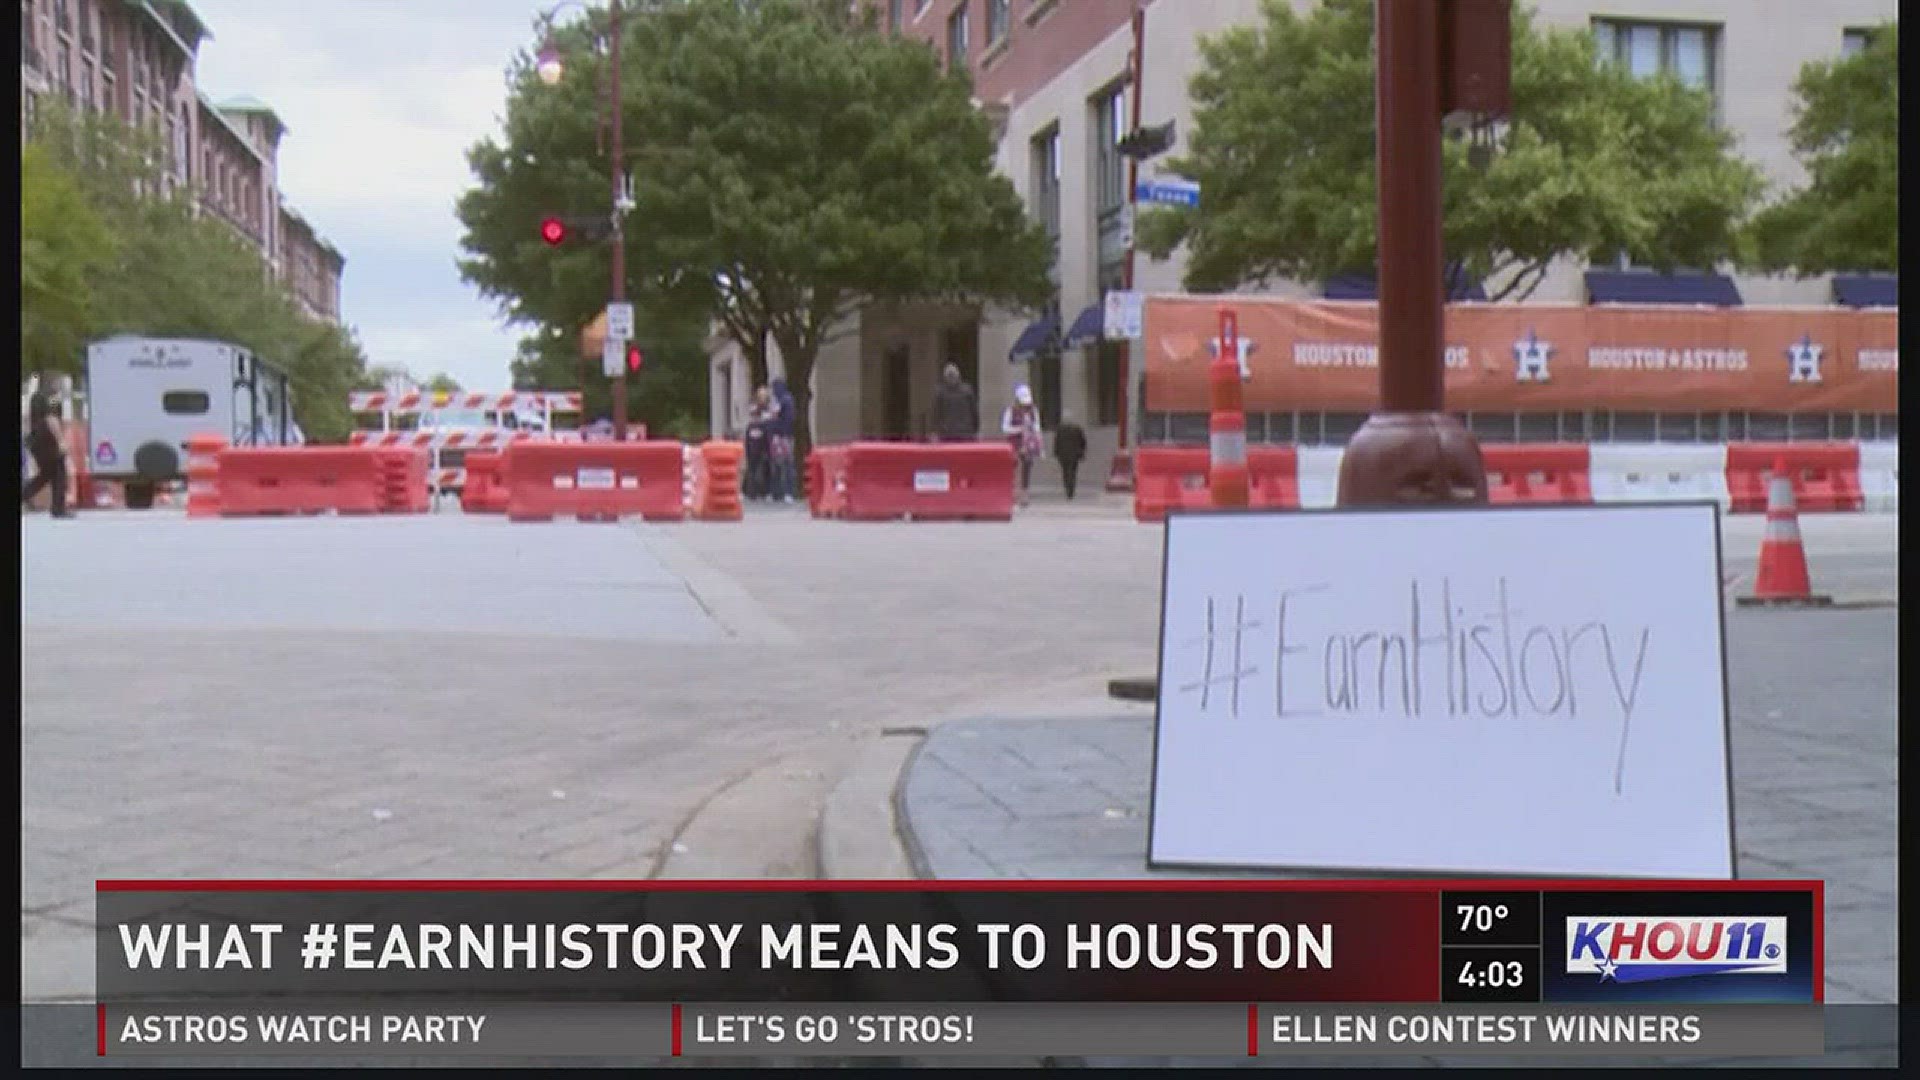 You've seen the hashtag #EarnHistory but how did it get started? KHOU reporter Melissa Correa has the answer.